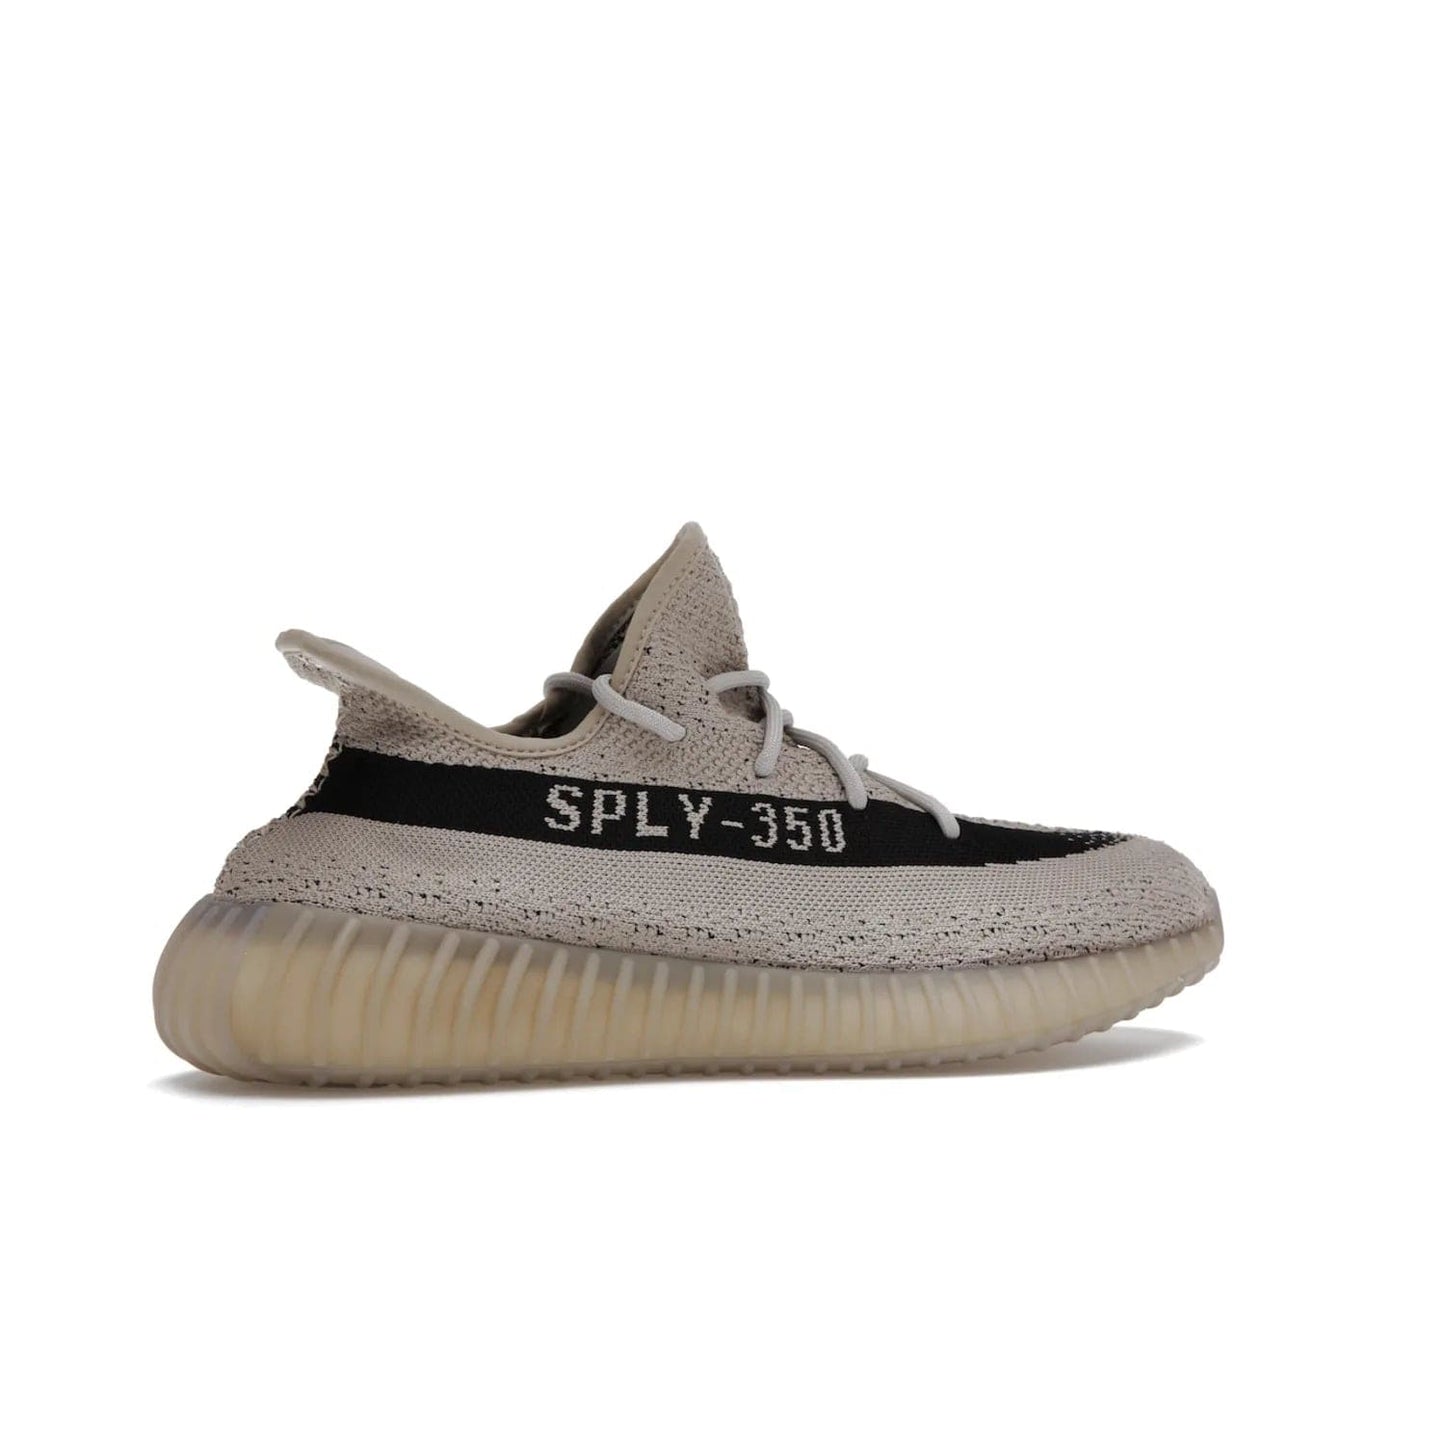 adidas Yeezy Boost 350 V2 Slate - Image 35 - Only at www.BallersClubKickz.com - Adidas Yeezy Boost 350 V2 Slate Core Black Slate featuring Primeknit upper, Boost midsole and semi-translucent TPU cage. Launched on 3/9/2022, retailed at $230.